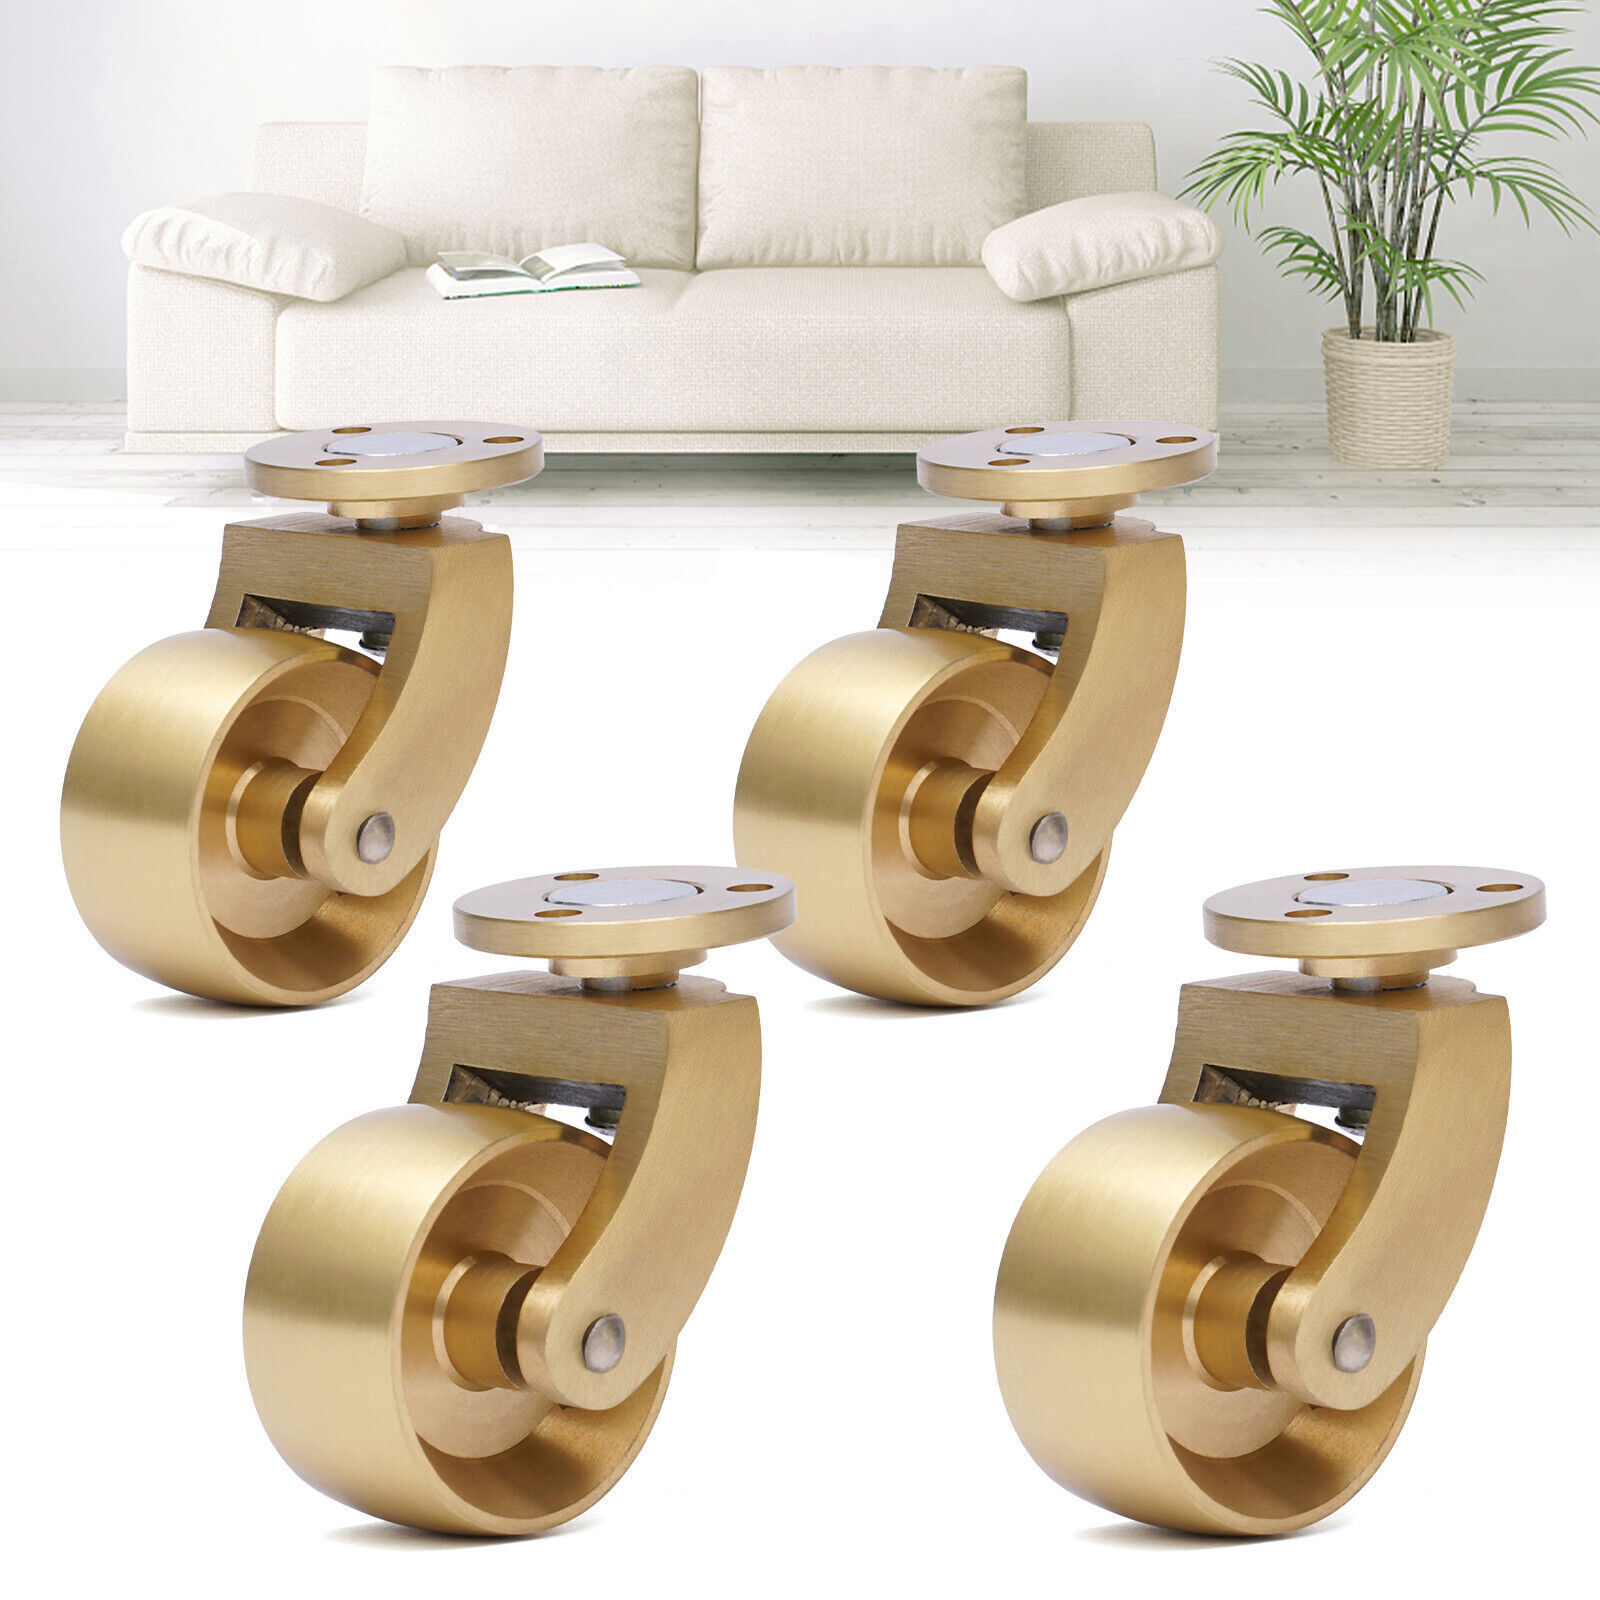 4PCS Brass Universal Furniture Casters Table Chair Desk Sofa Piano Wheel Rollers